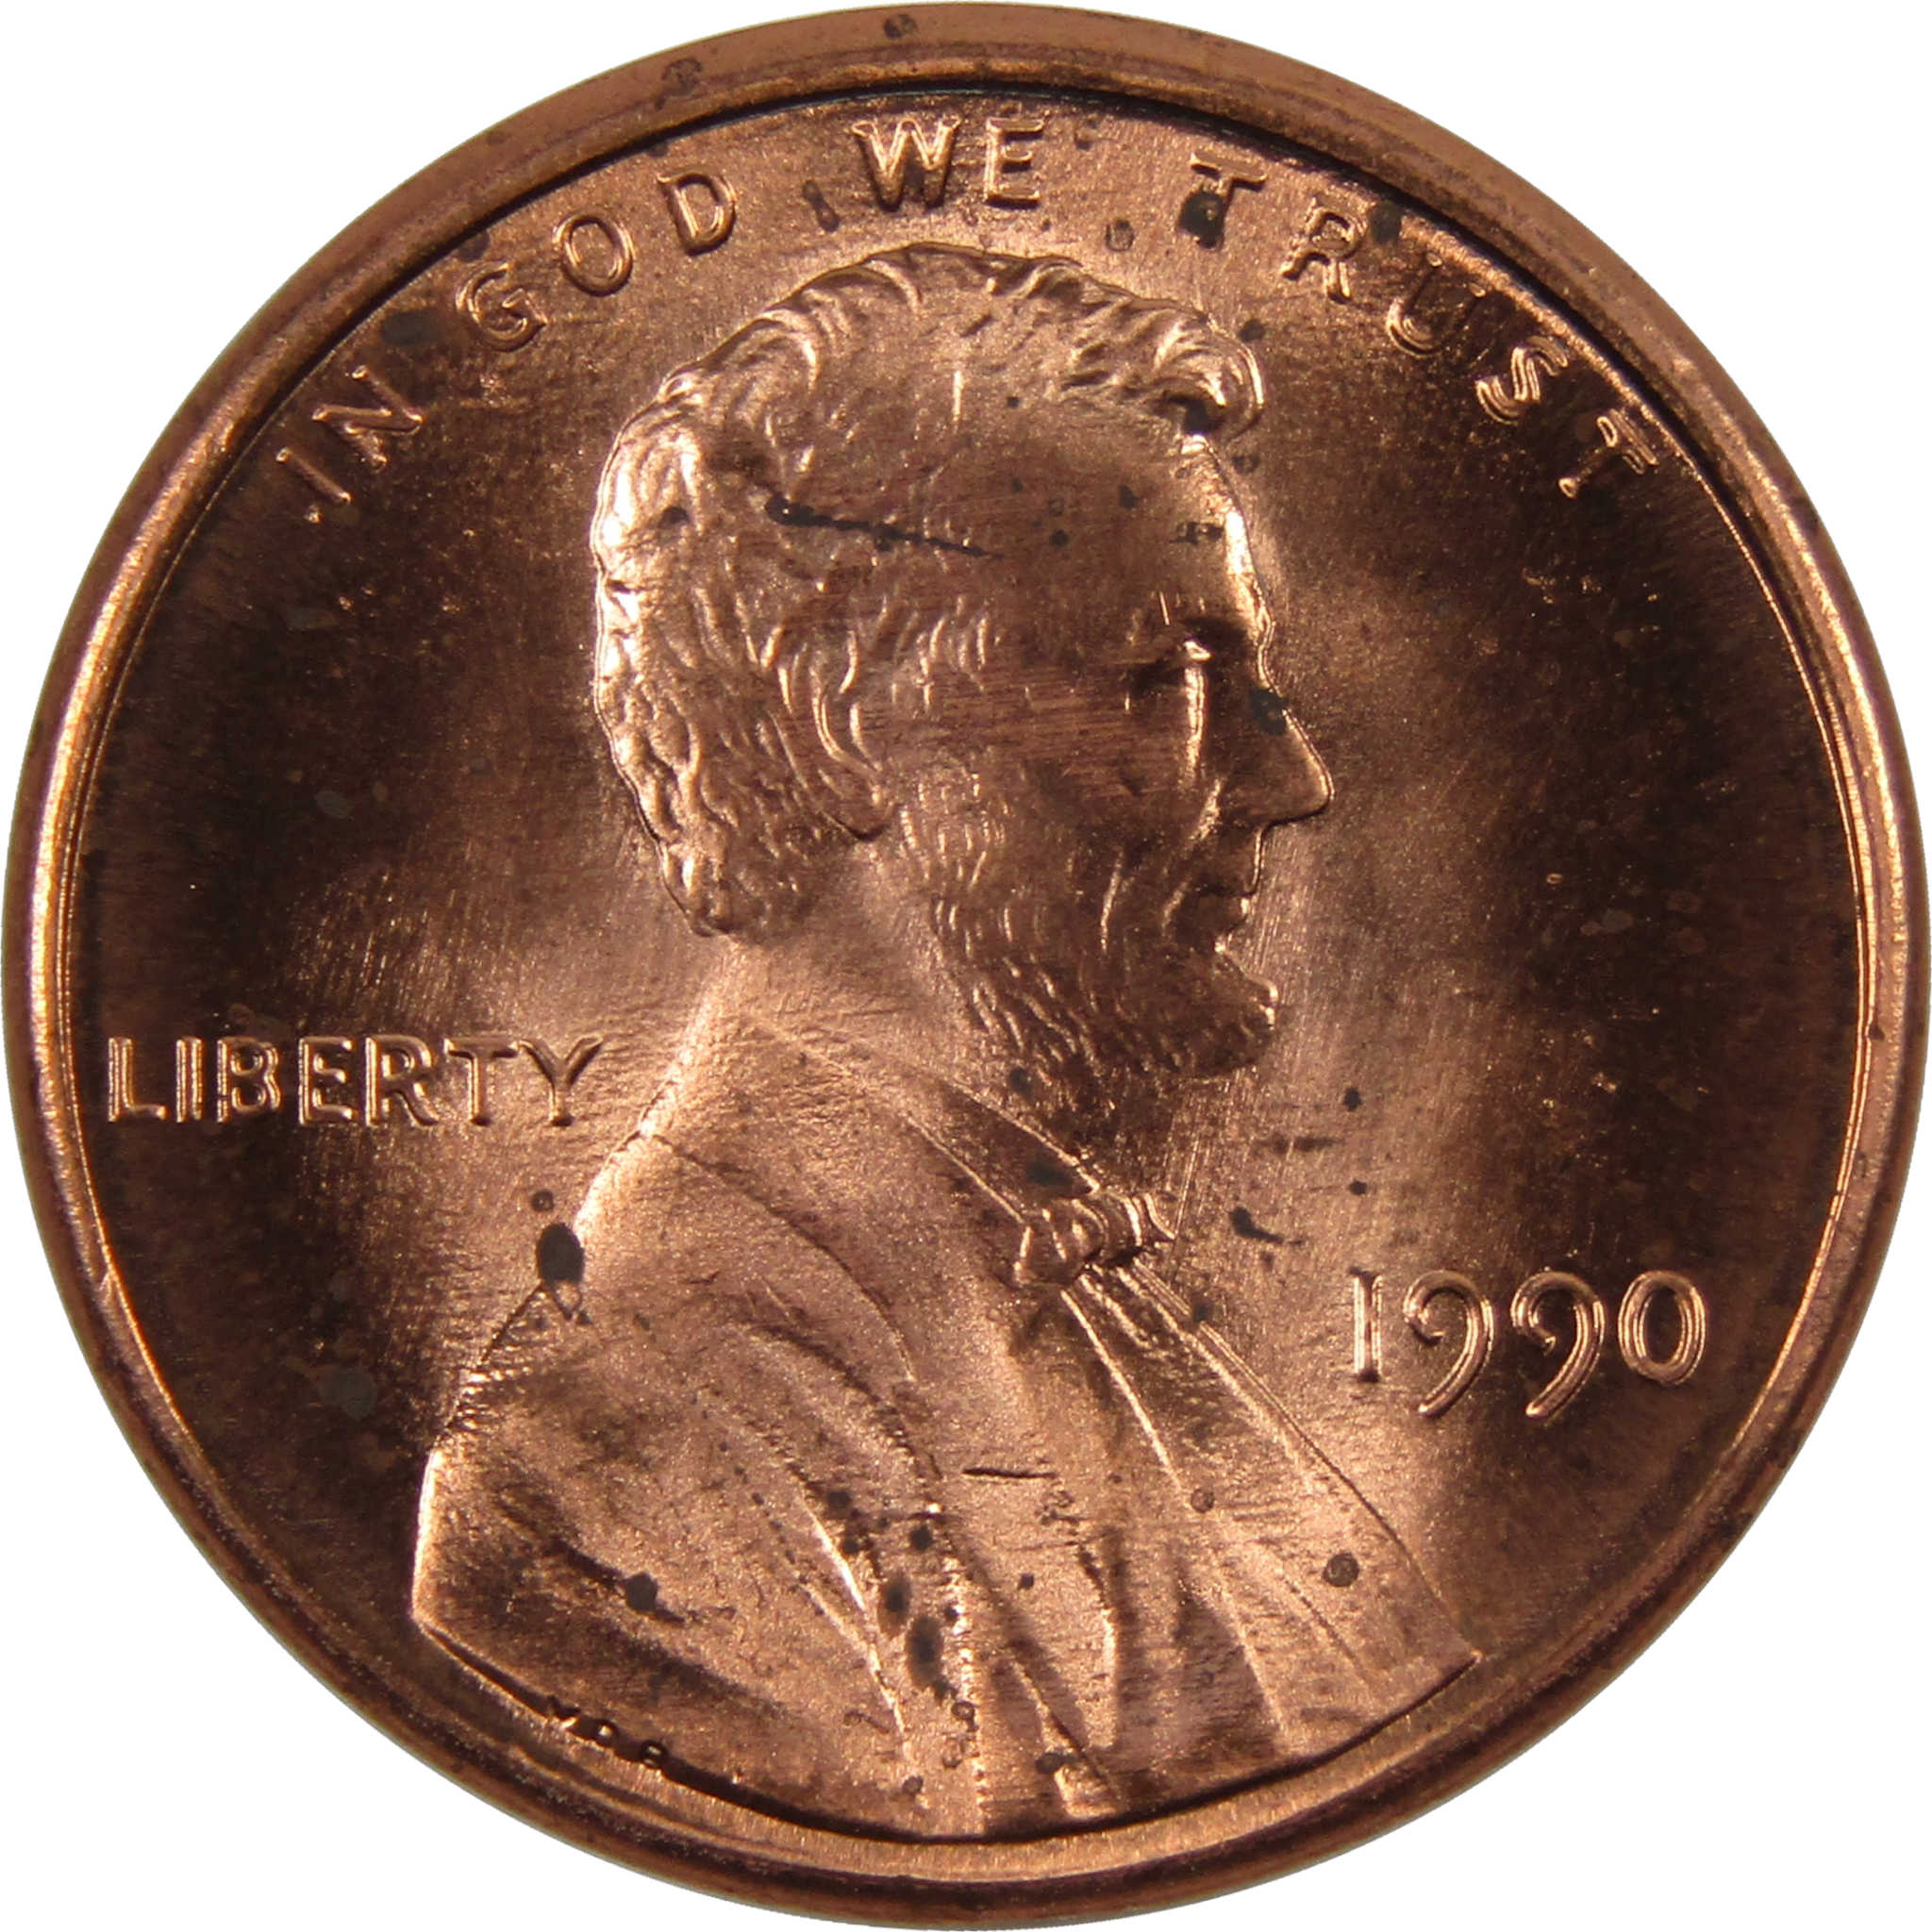 1990 Lincoln Memorial Cent BU Uncirculated Penny 1c Coin